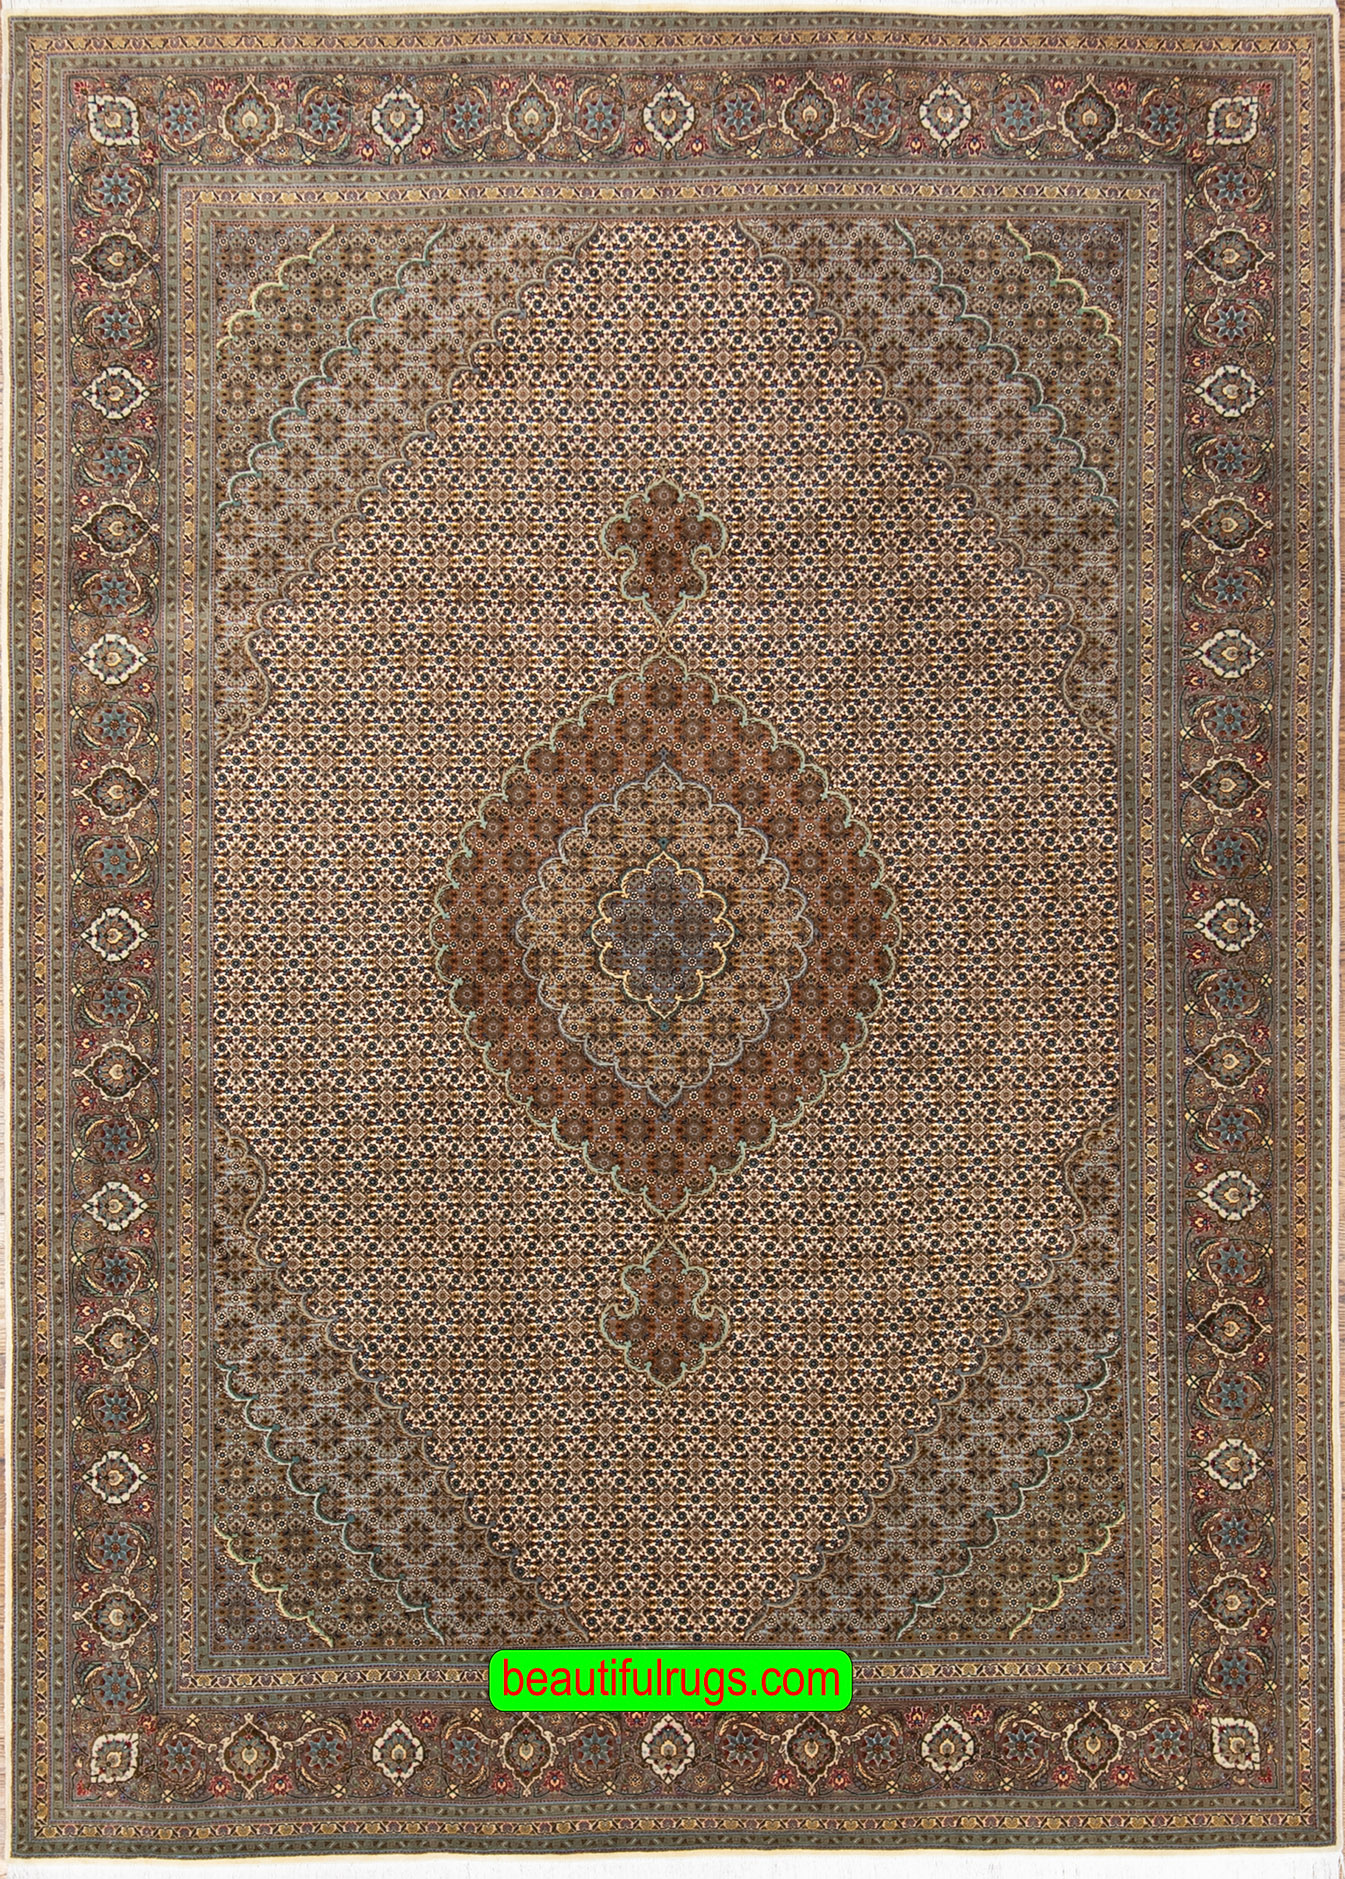 Handmade Persian Tabriz wool and silk rug with medallion in beige and green colors. Size 6.9x10.